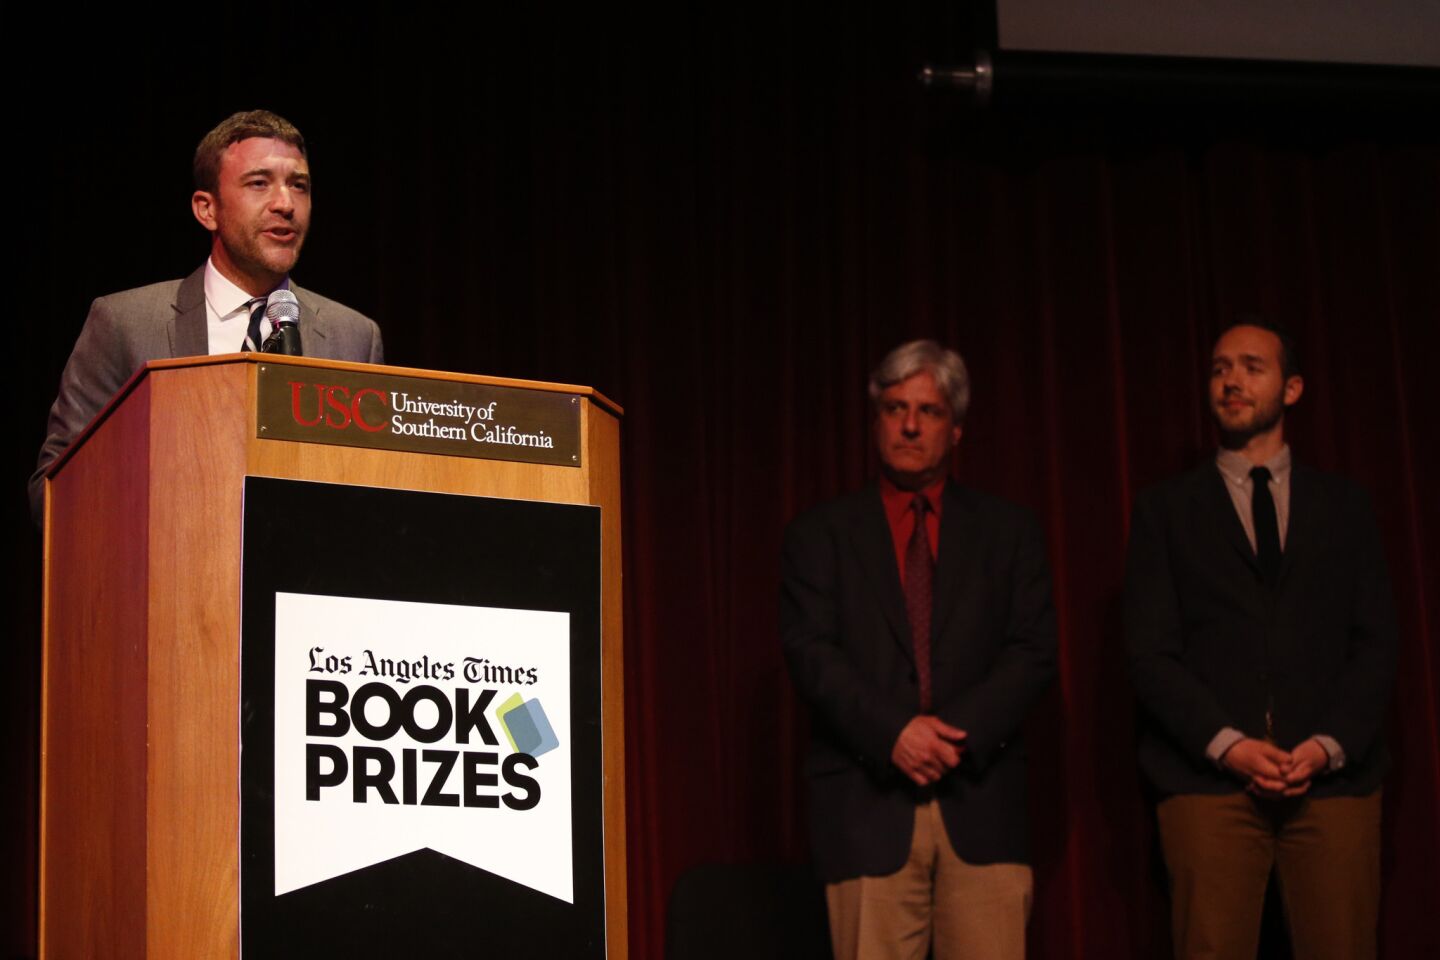 The winners of the Los Angeles Times Book Prizes are Los Angeles